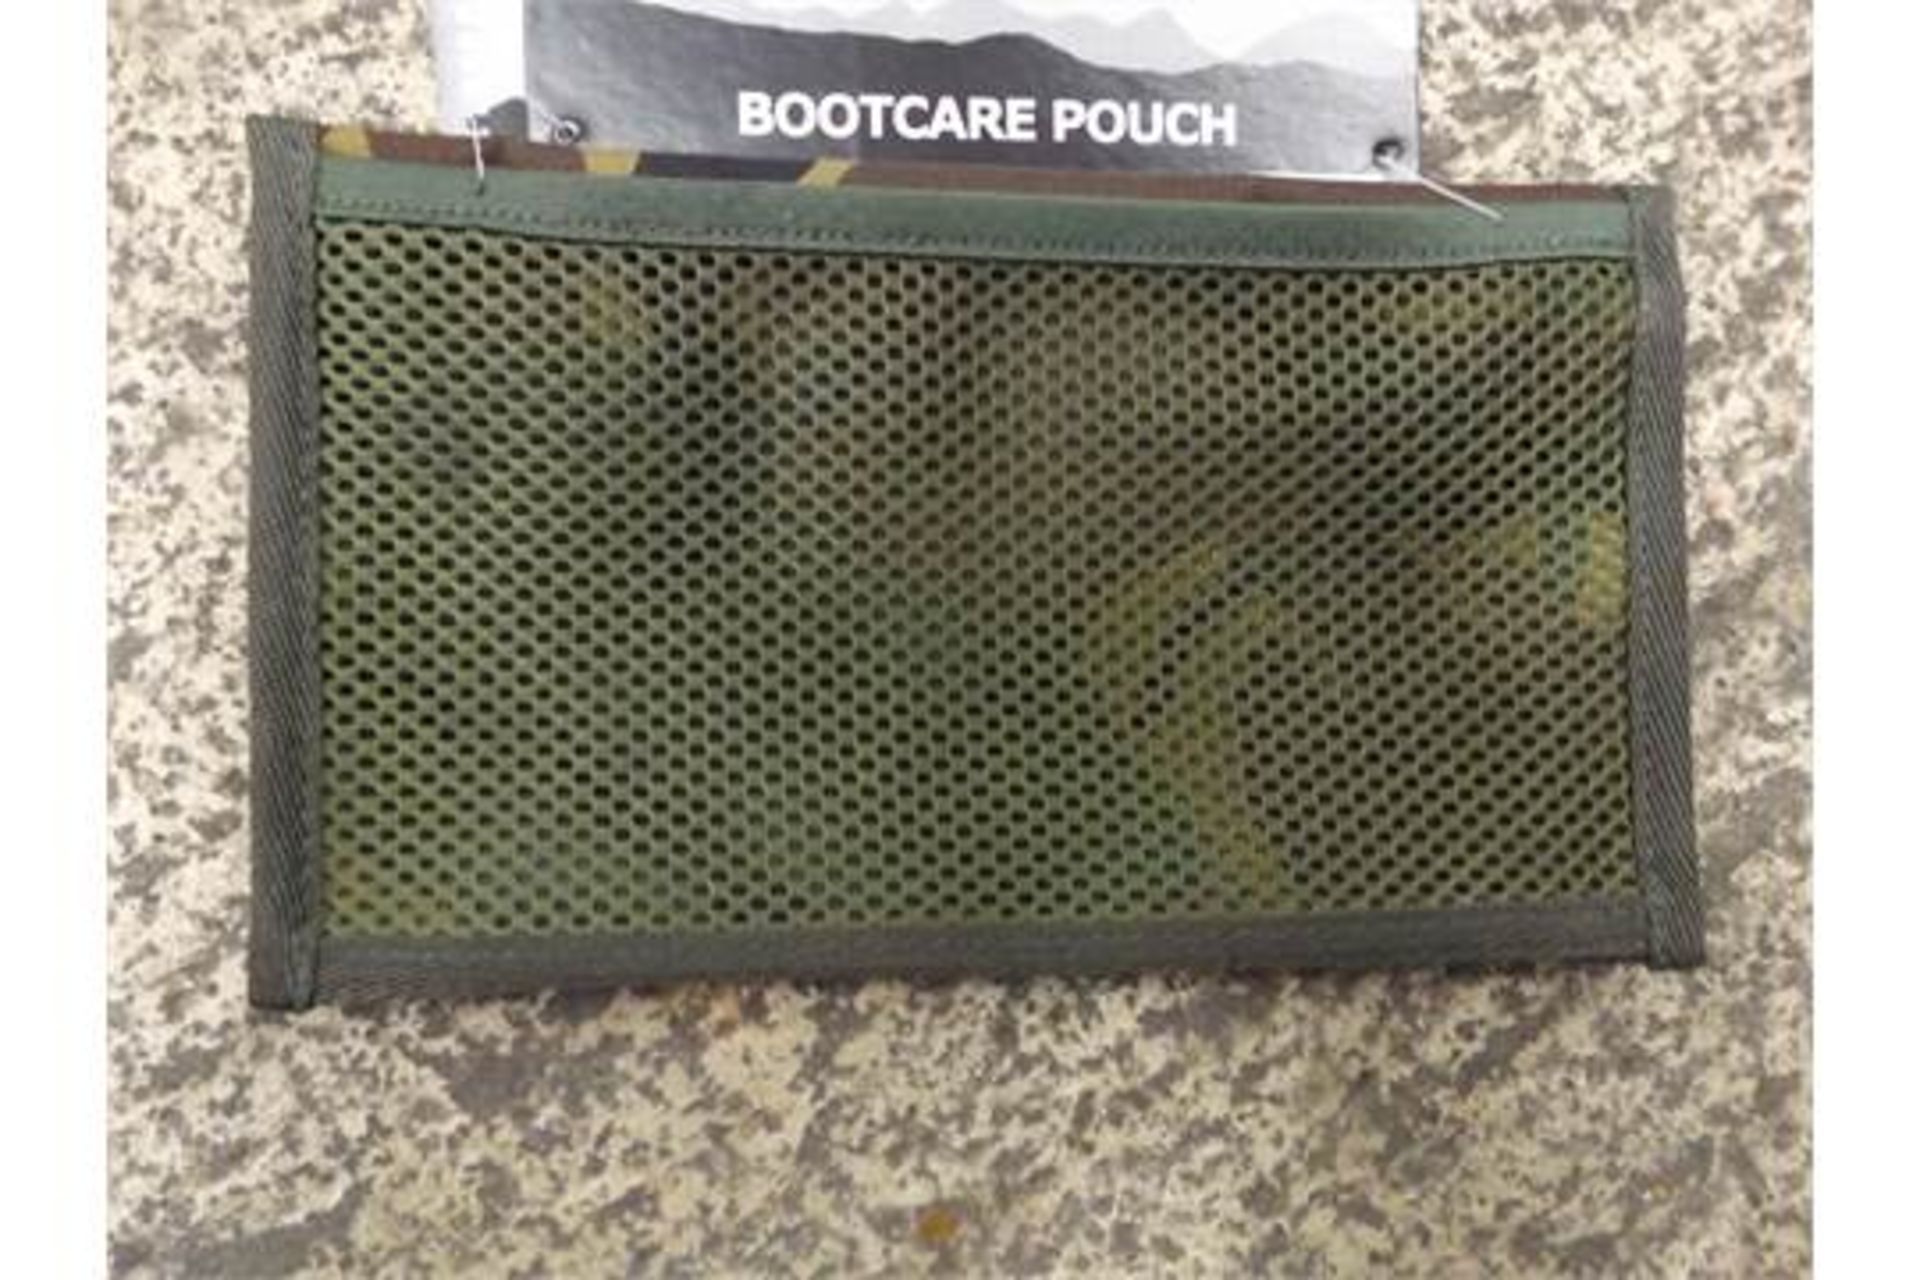 50 x Web-Tex Bootcare Pouches - Image 2 of 4